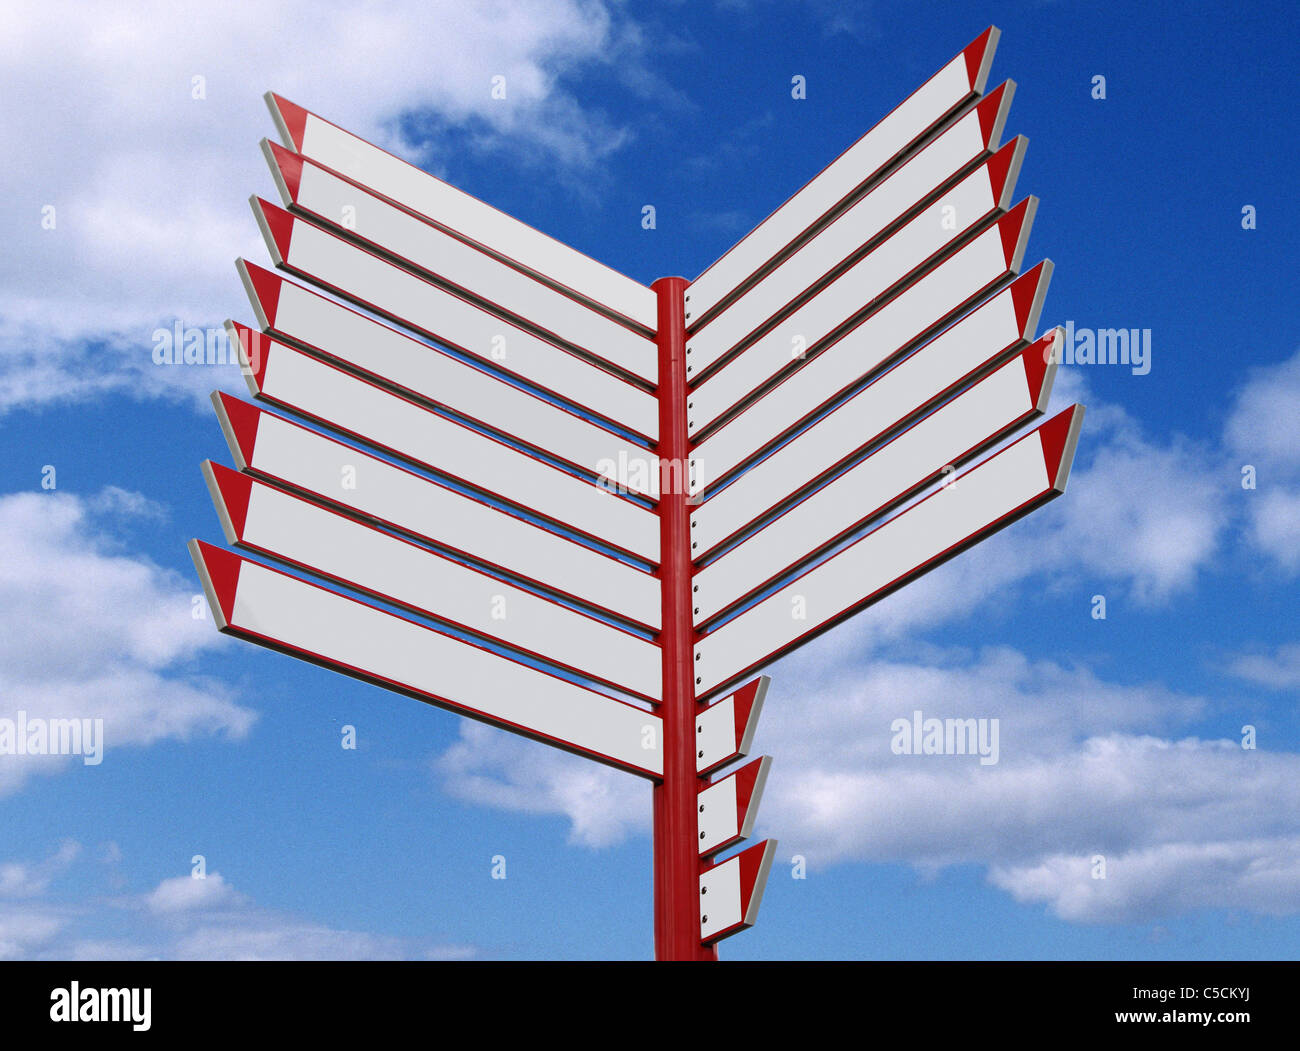 Signpost,  with empty fields, posting in different directions, blue sky, white clouds. Stock Photo